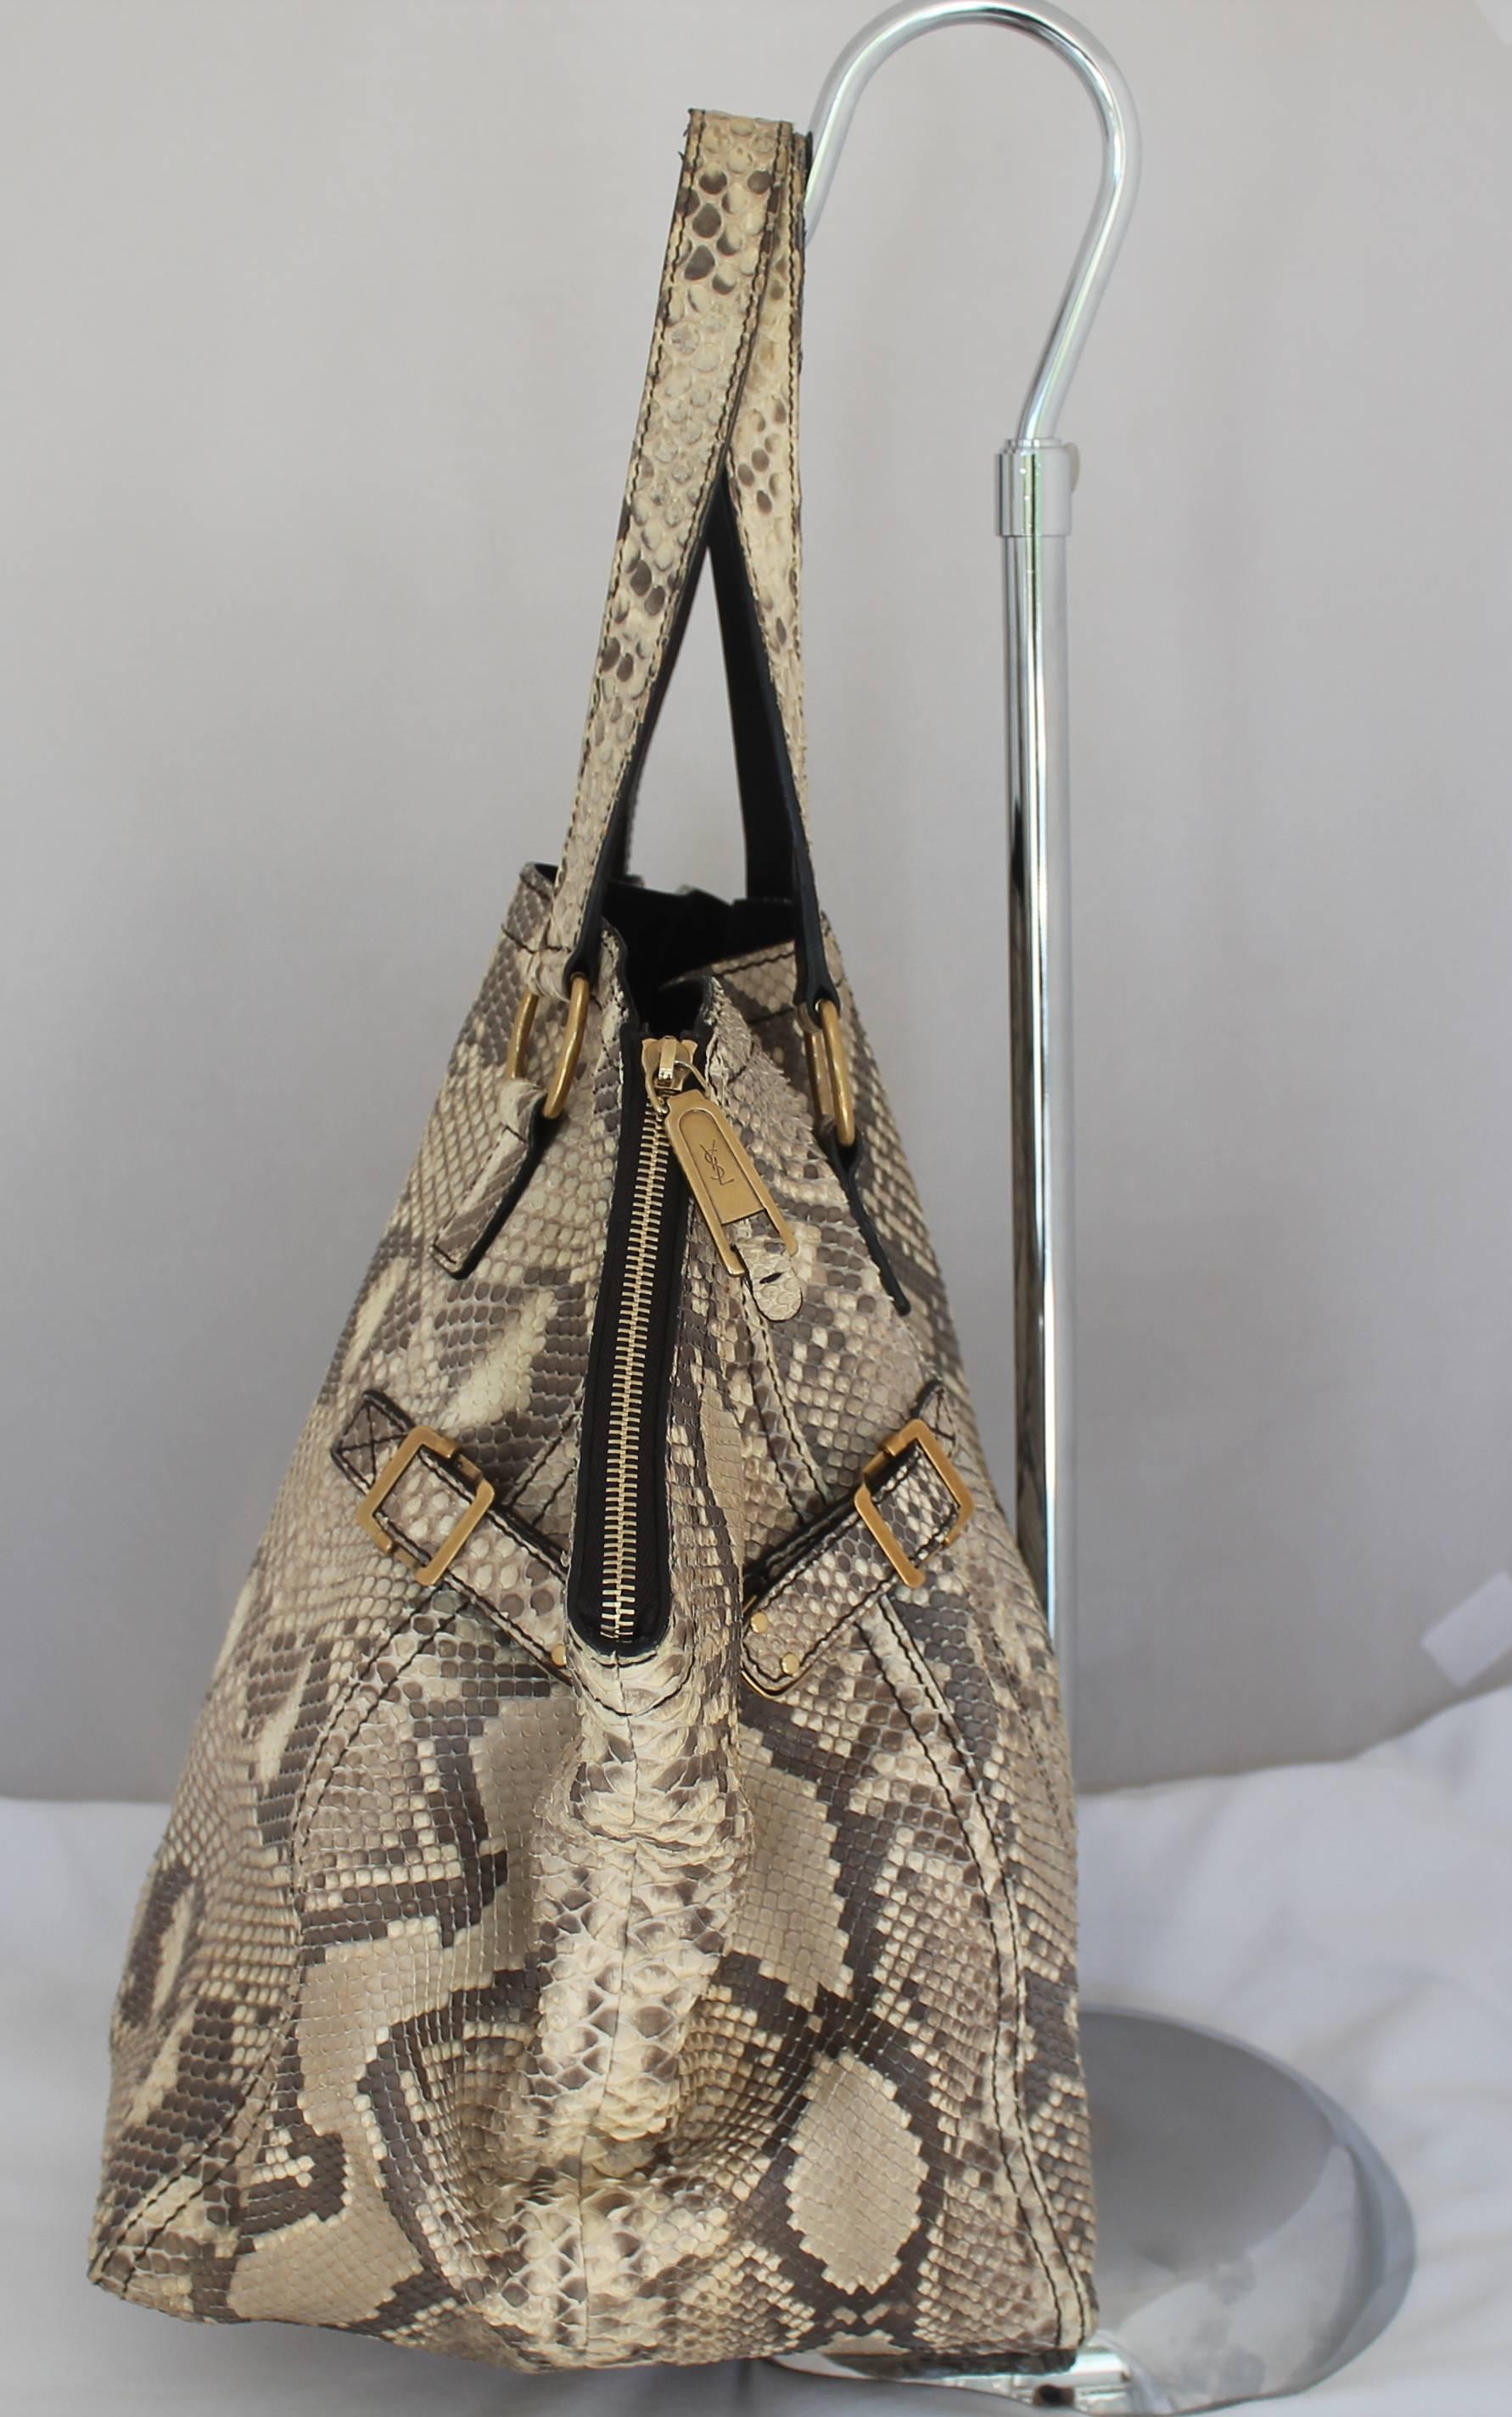 YSL Rive Gauche Earthtone Python Large Downtown Tote - GHW. This bag is in excellent condition with minor wear to the snake outside as it is very delicate. The bag features a trendy pointed top, top zippers on both flaps, 4 bottom feet, a brown